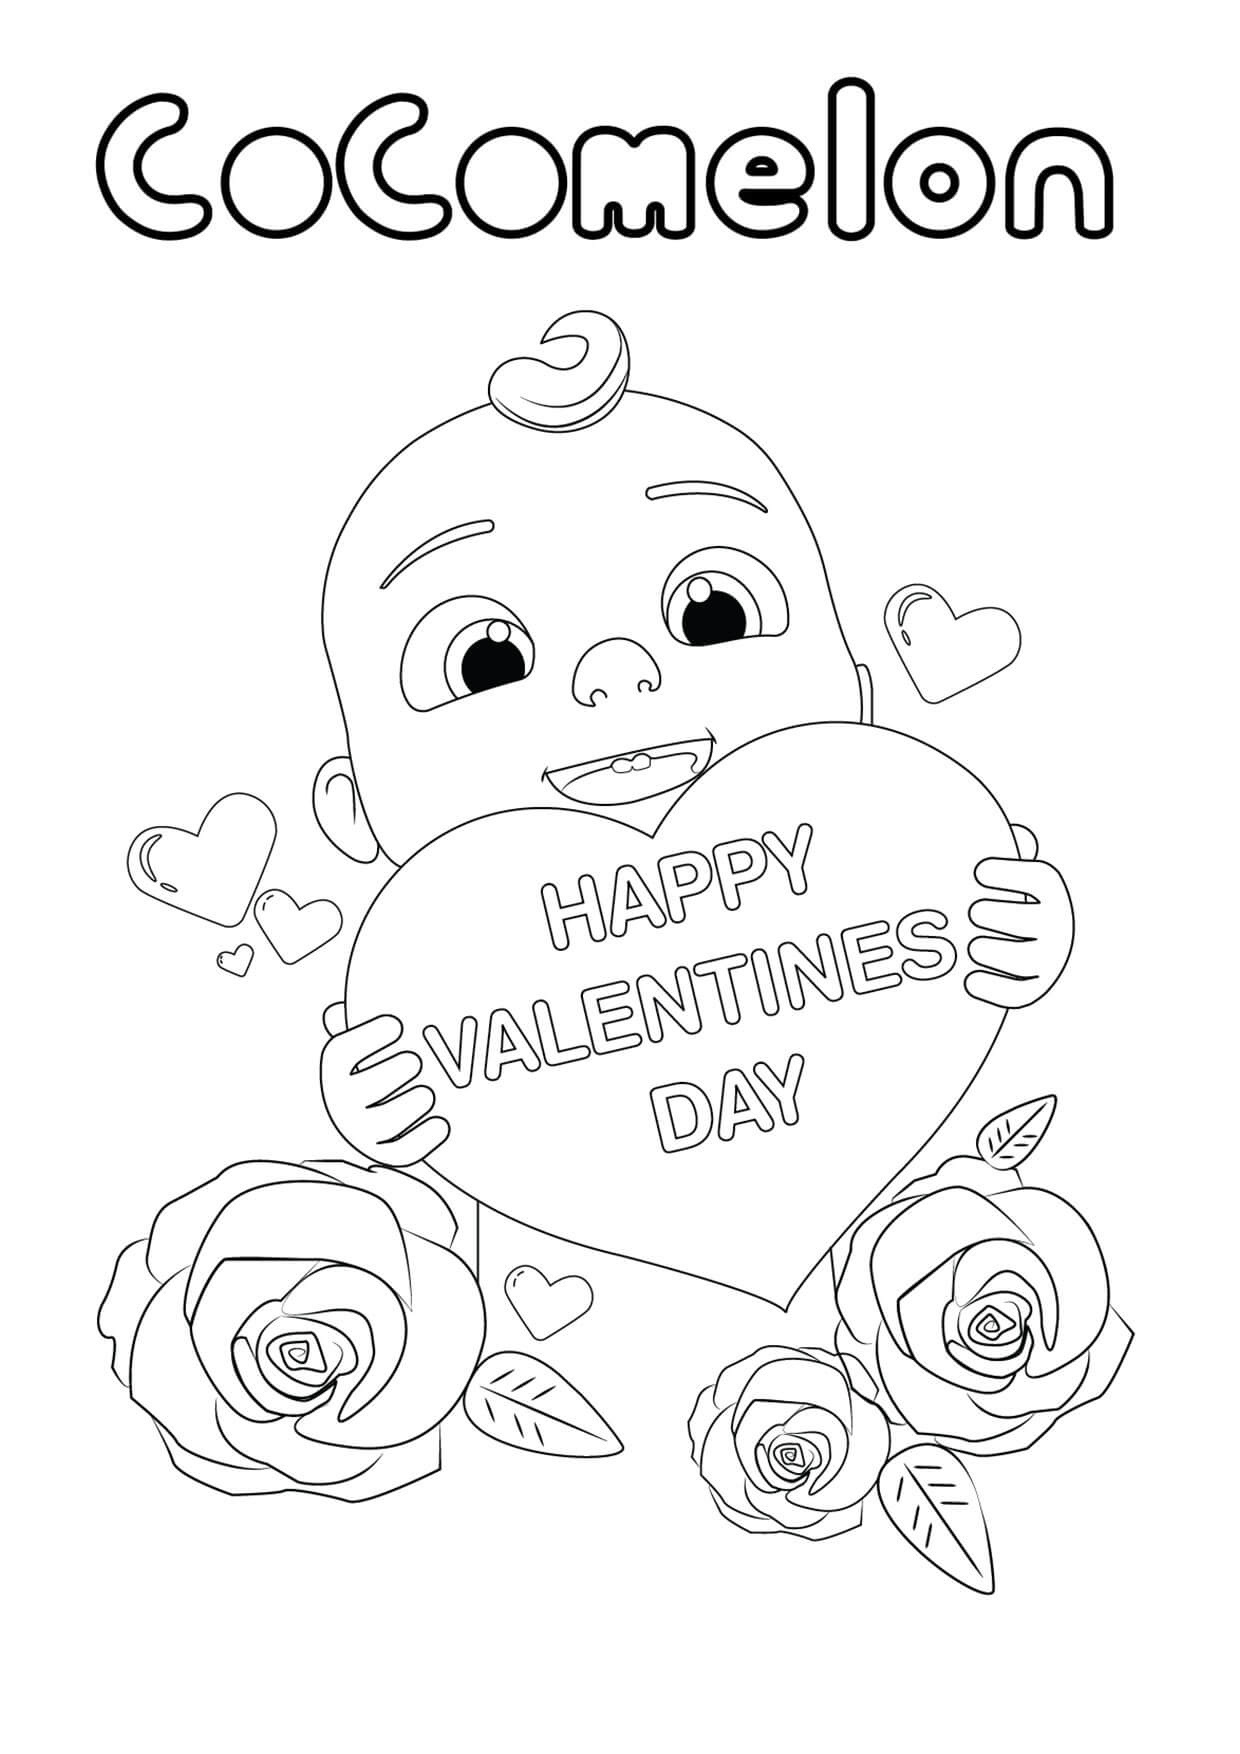 Cocomelon with Heart and Roses in Valentine coloring page